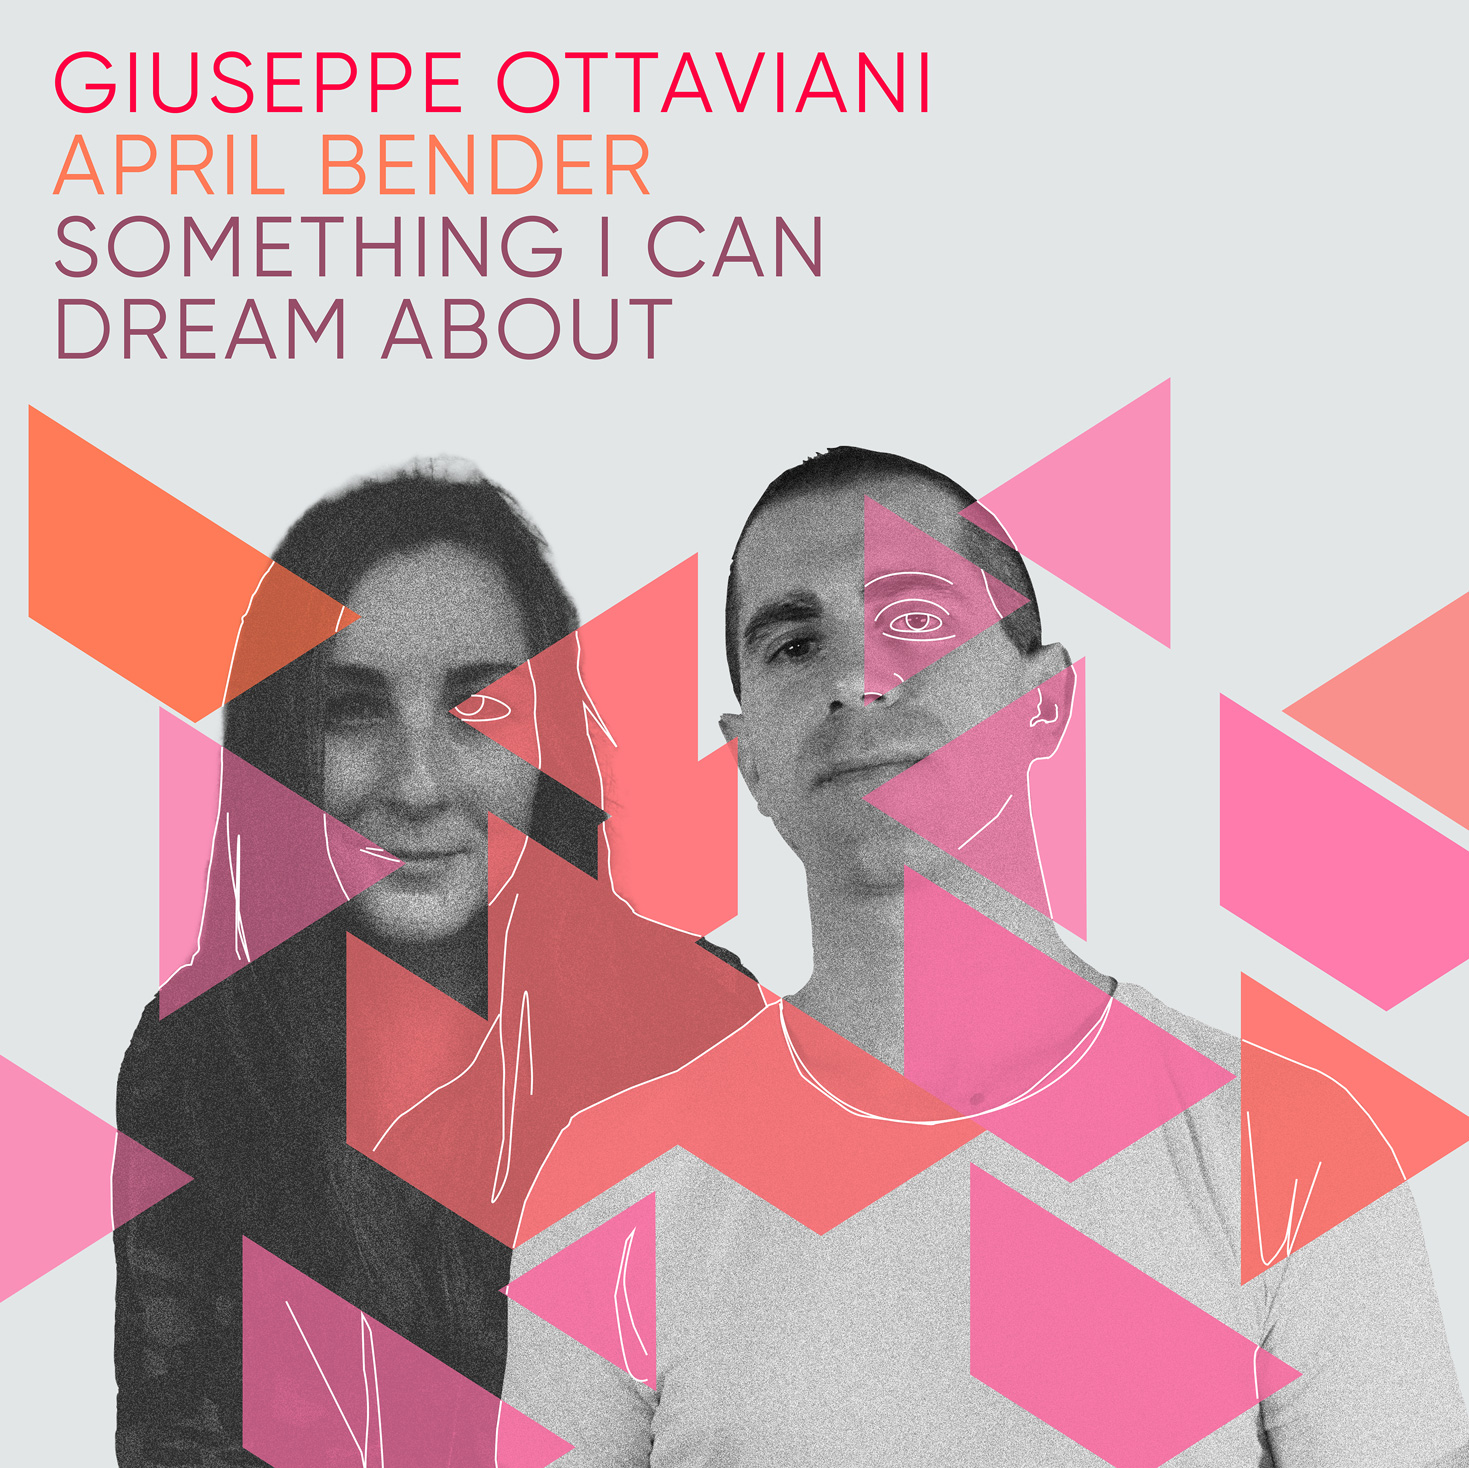 Giuseppe Ottaviani and April Bender presents Something I Can Dream About on Black Hole Recordings